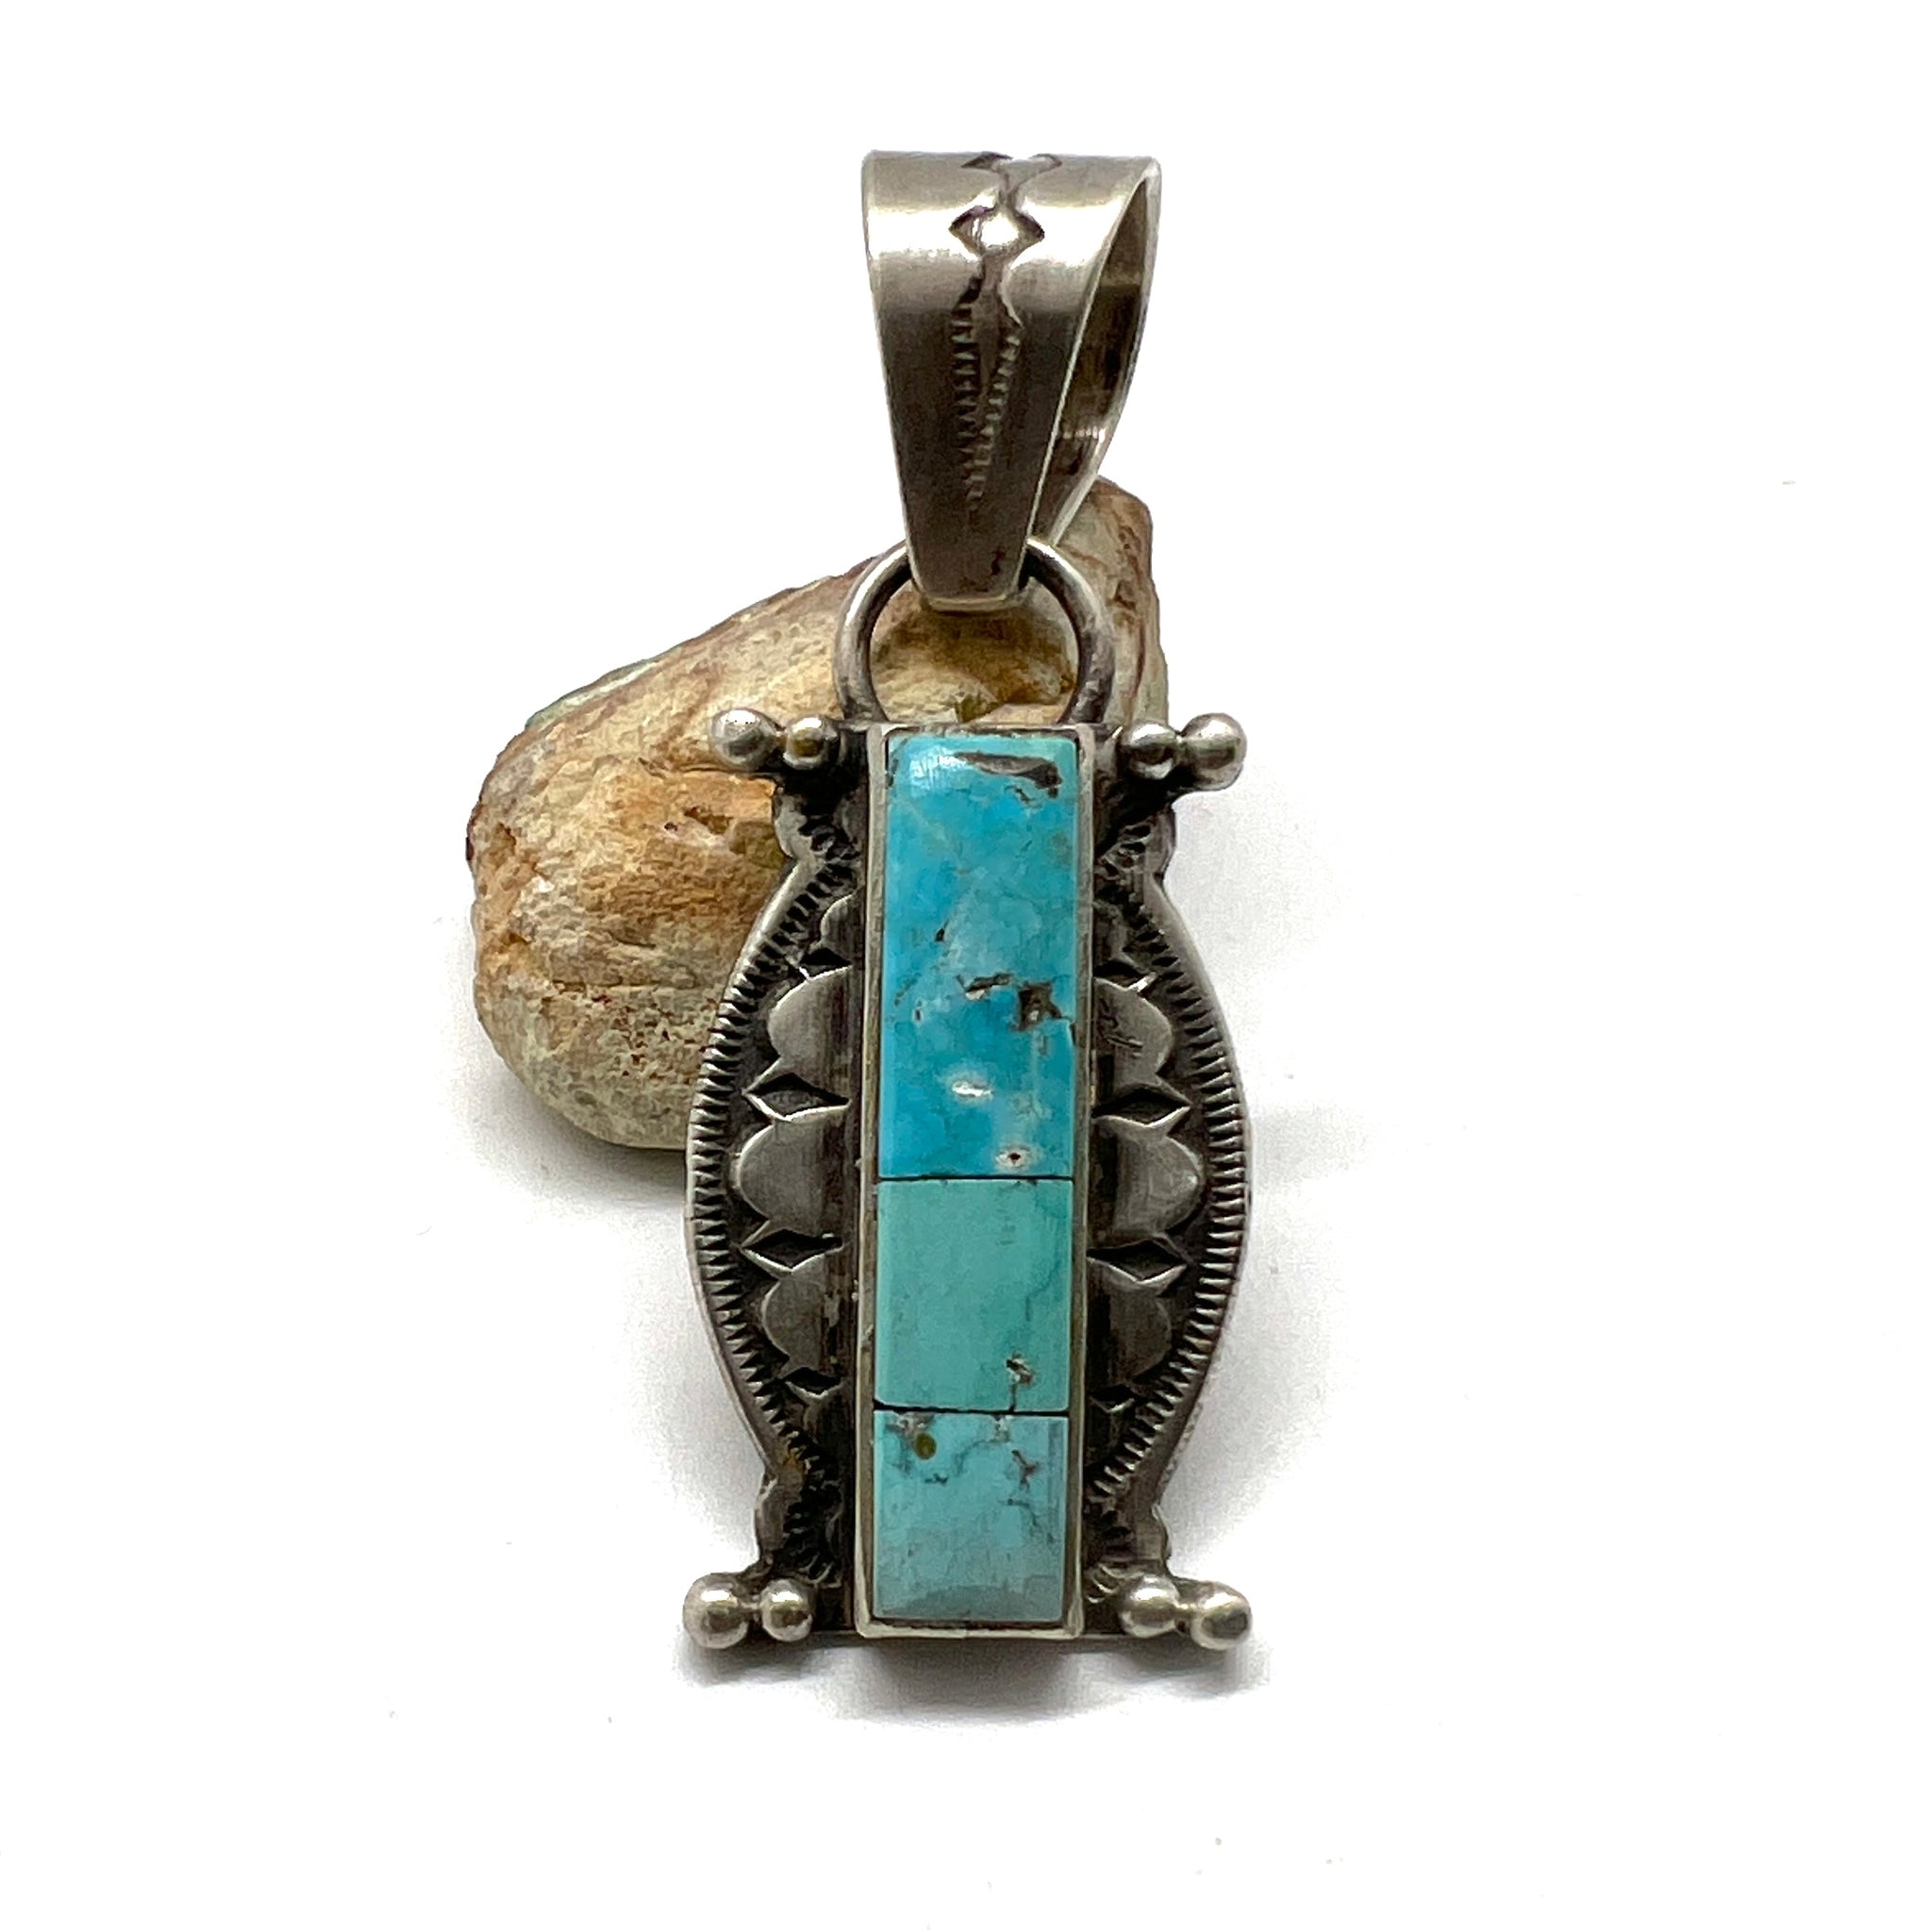 Necklace, Leather Thong, Squash Blossom, Turquoise, Artisan, Jock Favo